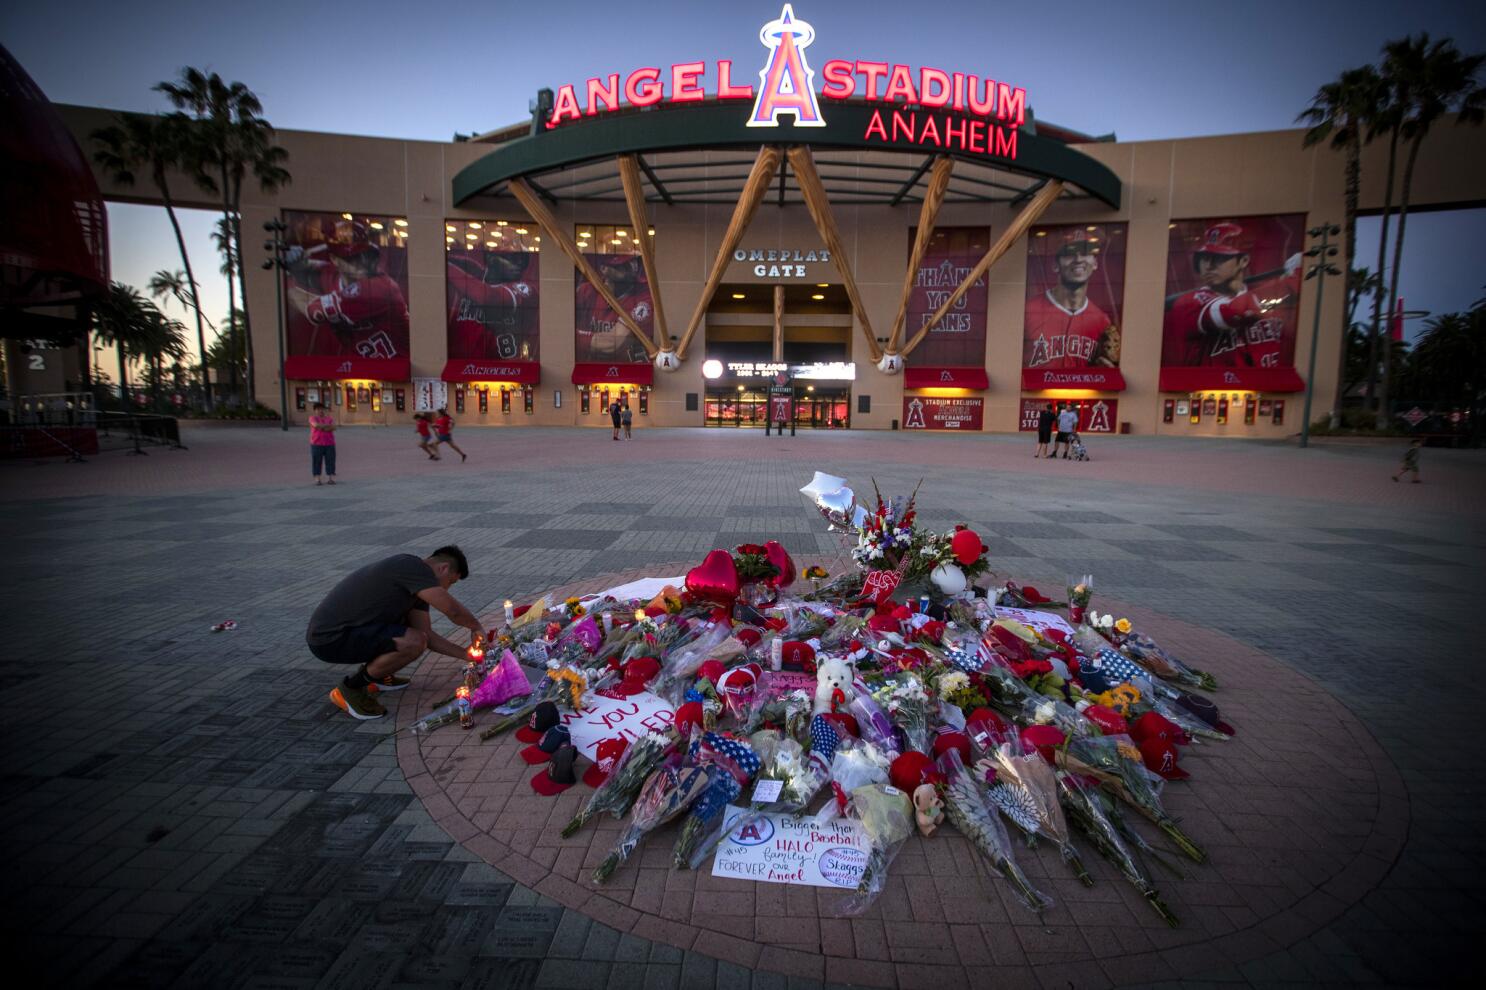 Fans gather at Angel Stadium after Tyler Skaggs' death